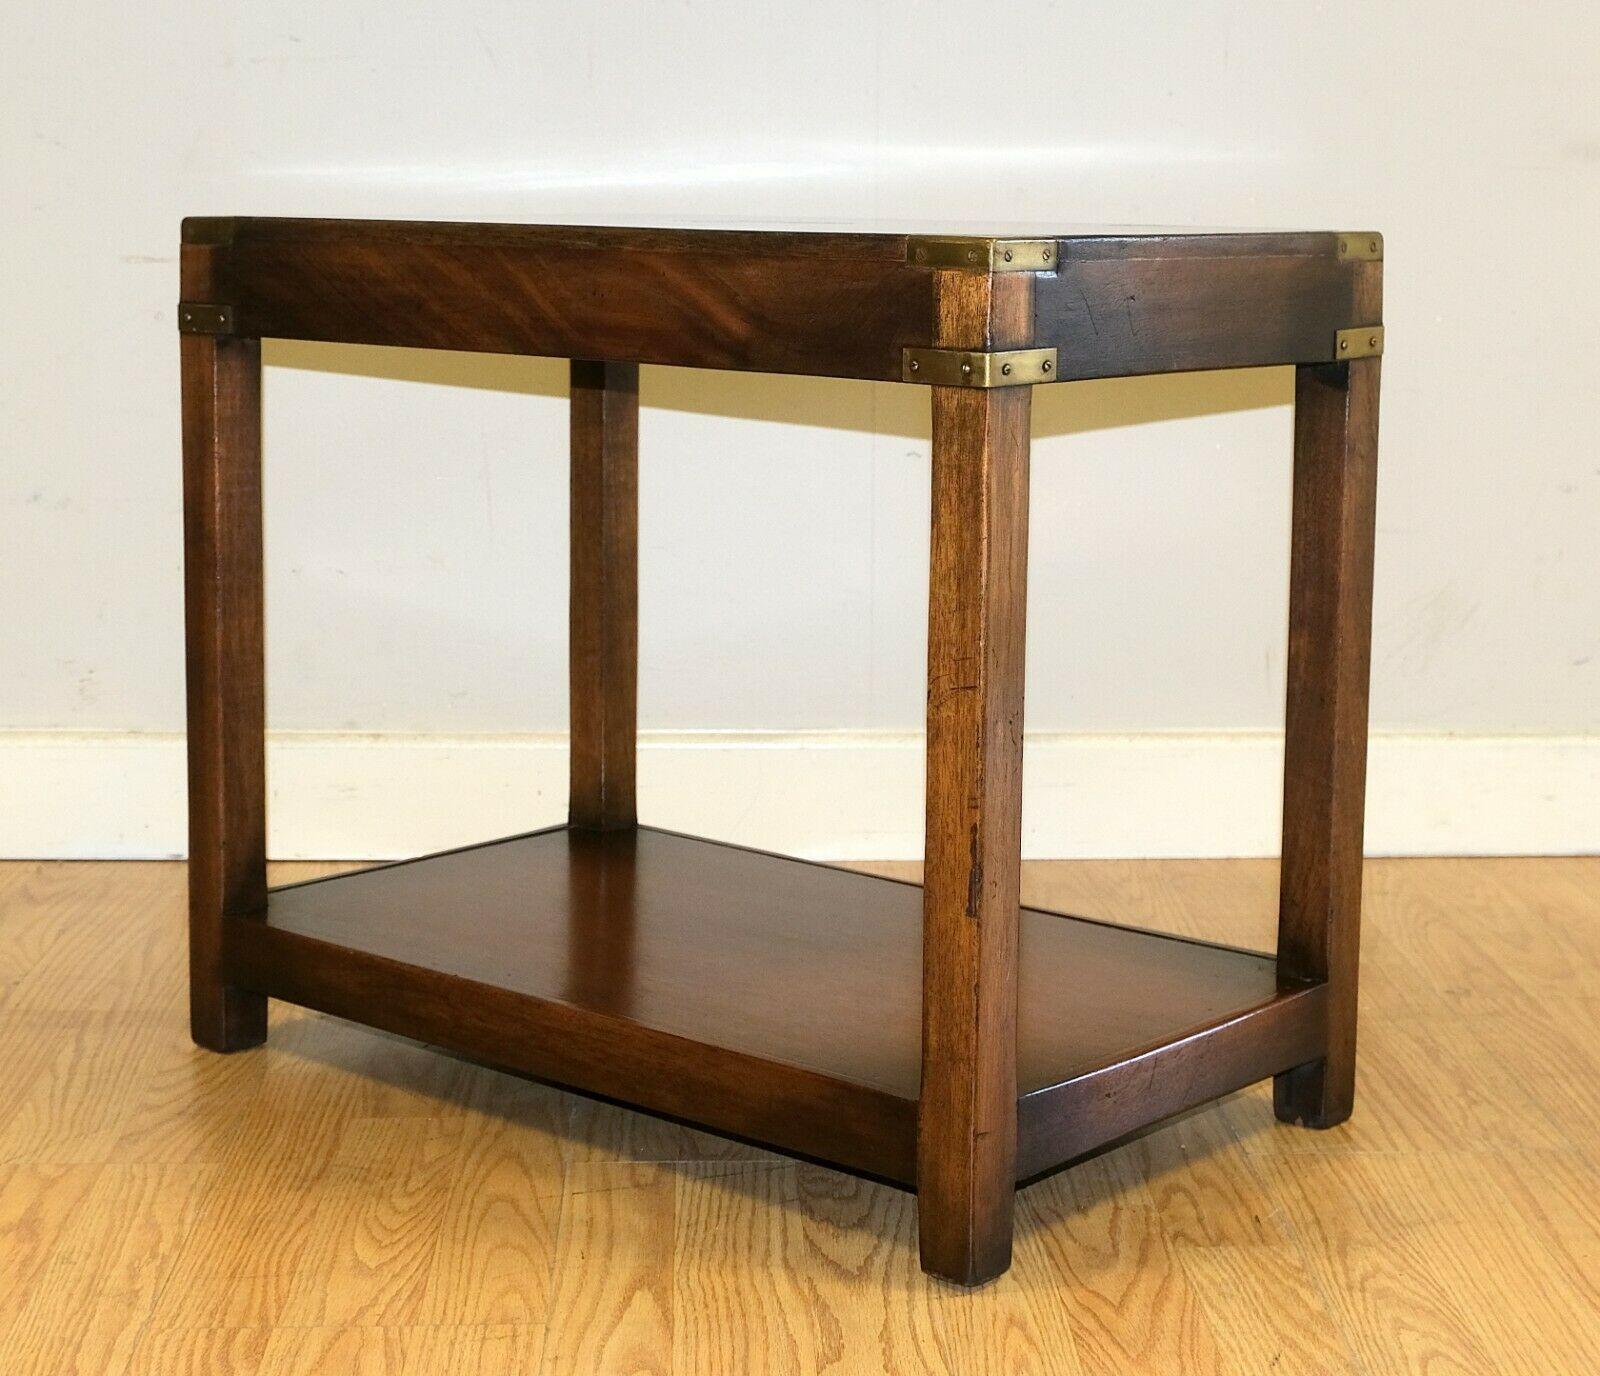 Hand-Crafted Lovely Kennedy Campaign Hardwood Side Table Brass Inset on Top & Single Shelf